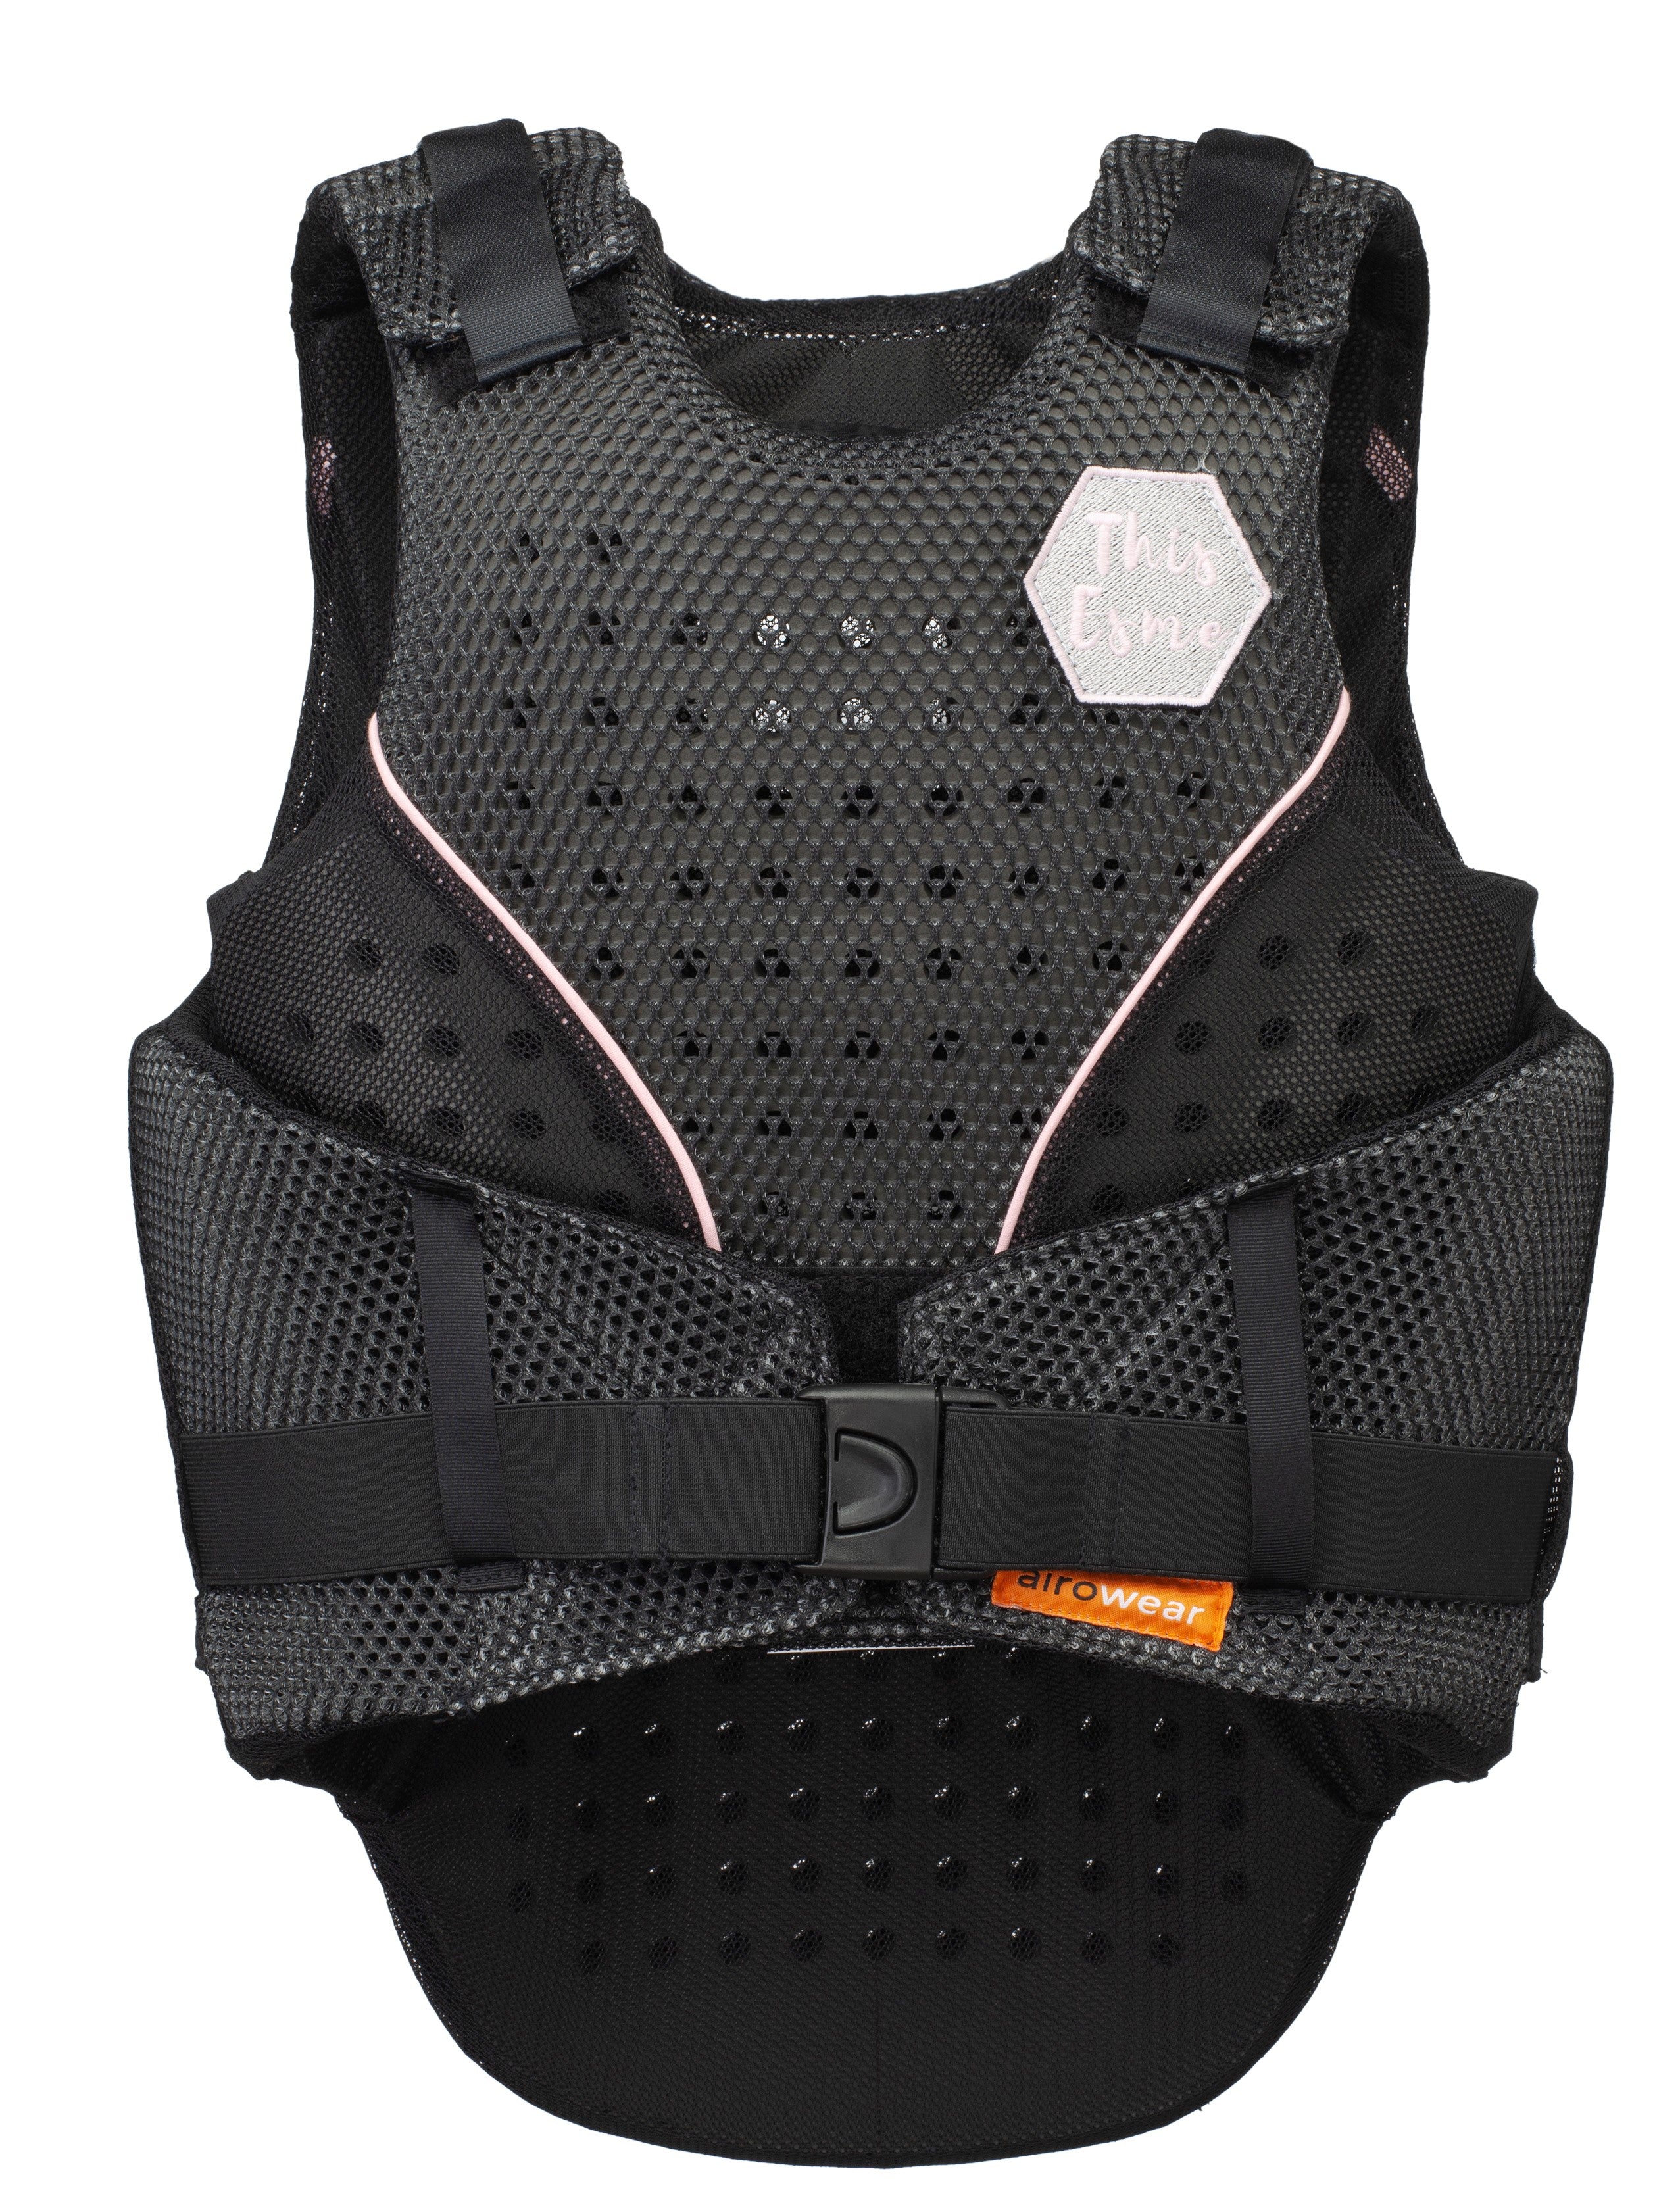 Airowear This Esme Adults Body Protector - Baby Blue